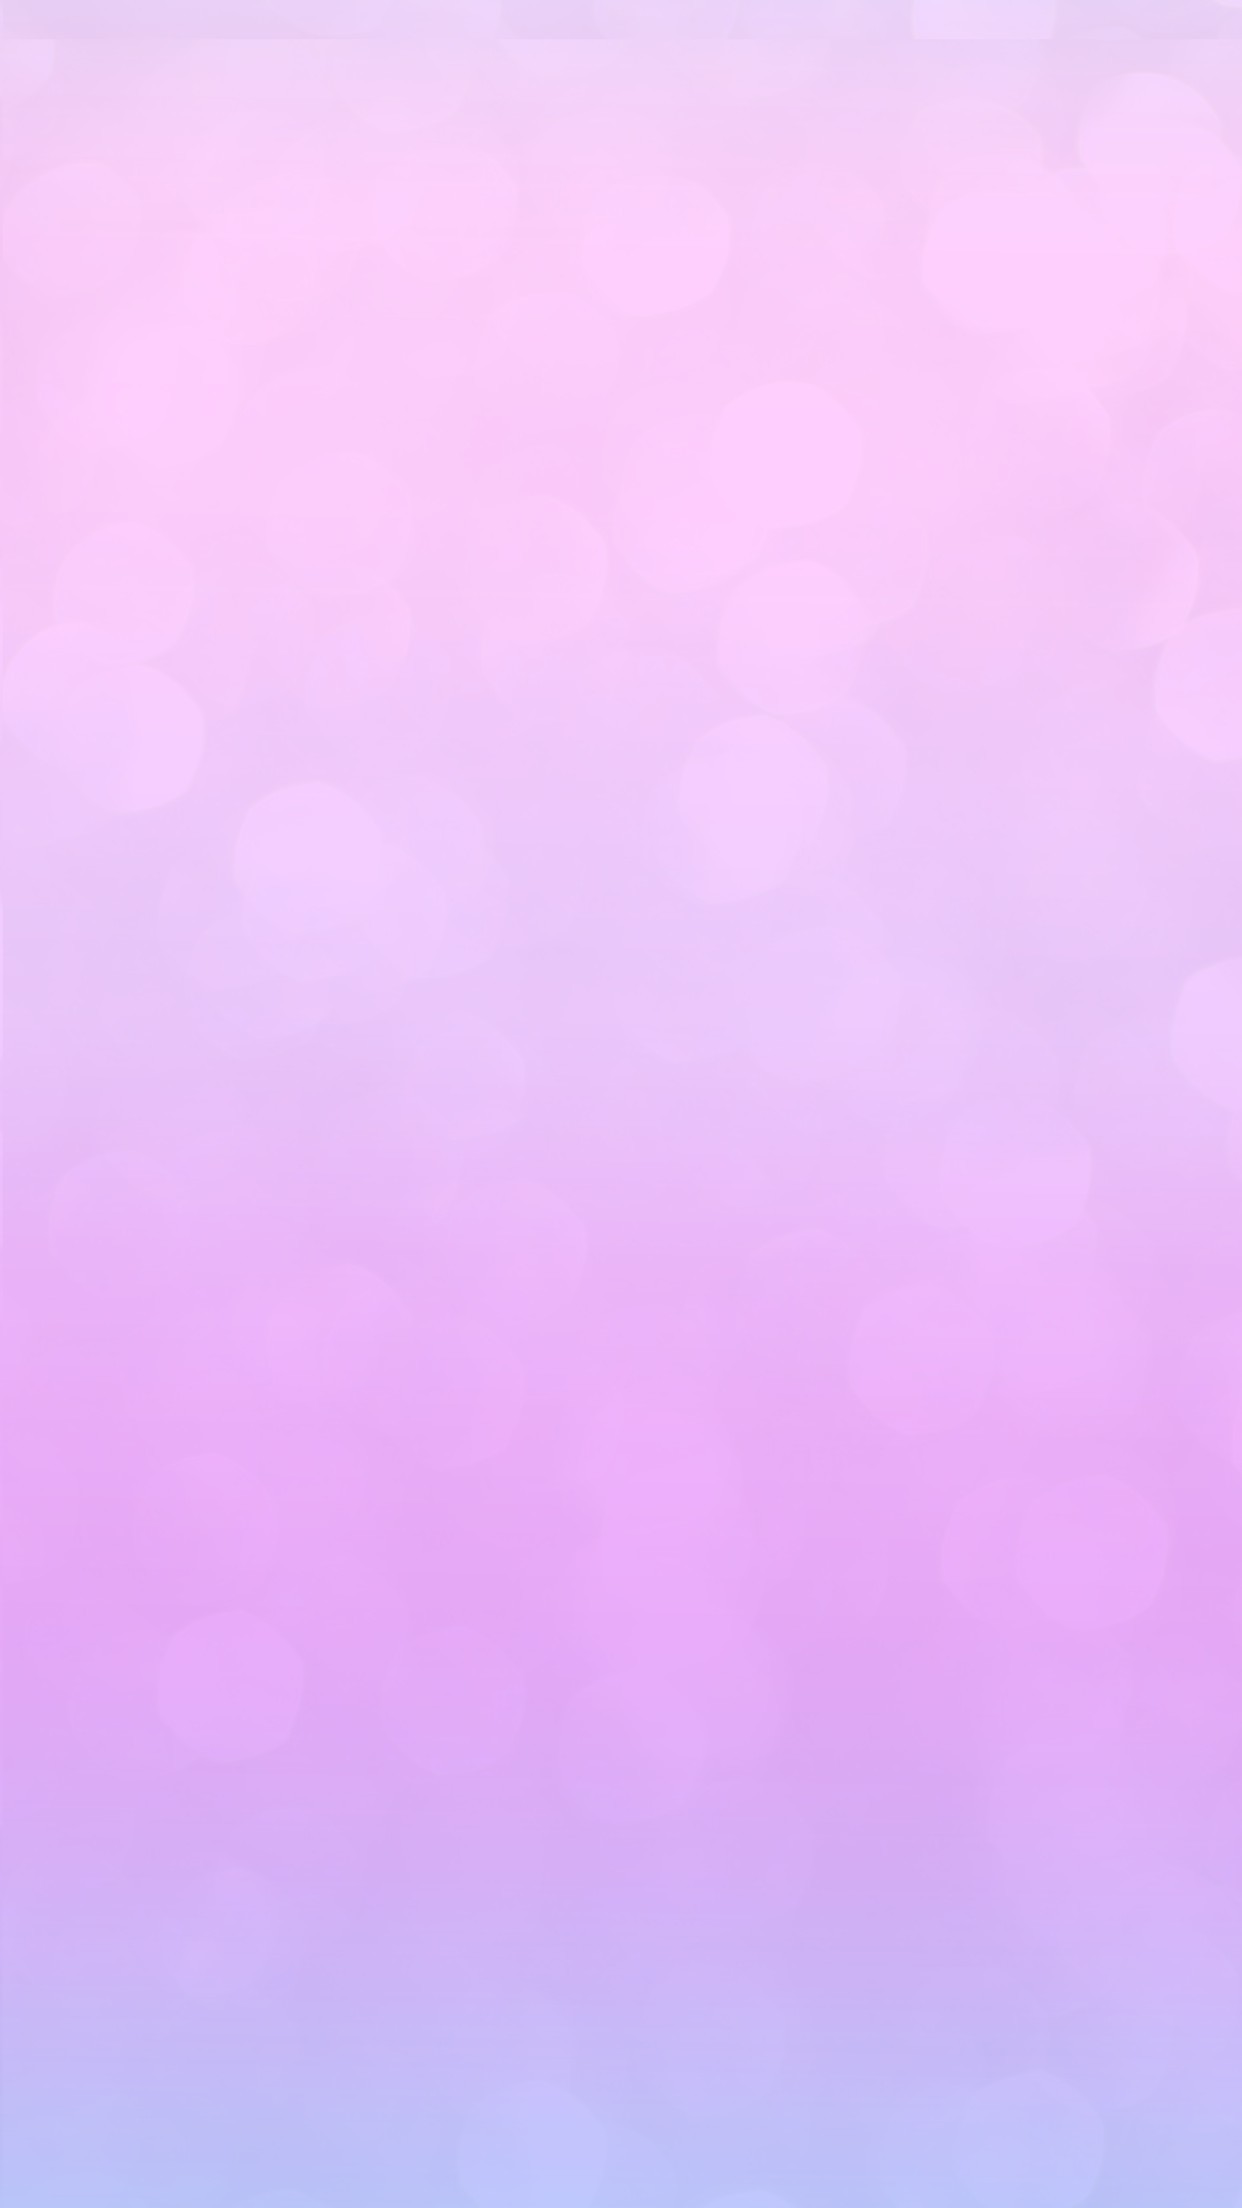 1242x2208, Wallpaper, Background, Iphone, Android, - Pink Purple Ombre Background - HD Wallpaper 